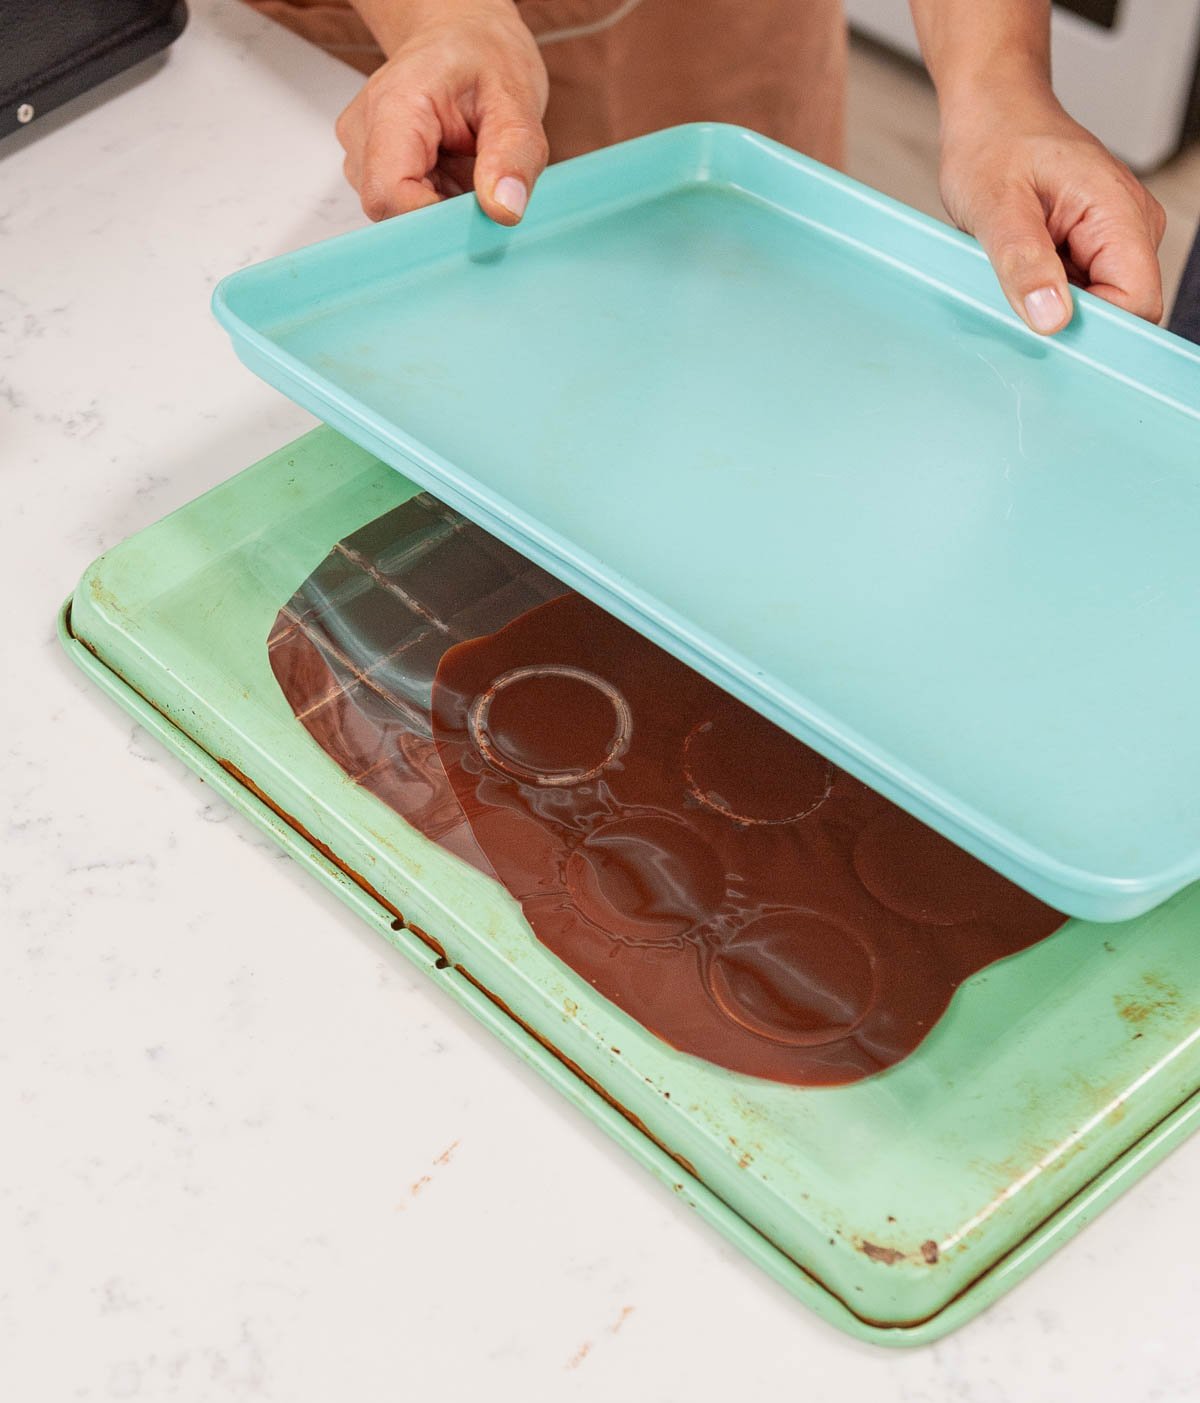 chocolate on acetate between two sheet pans